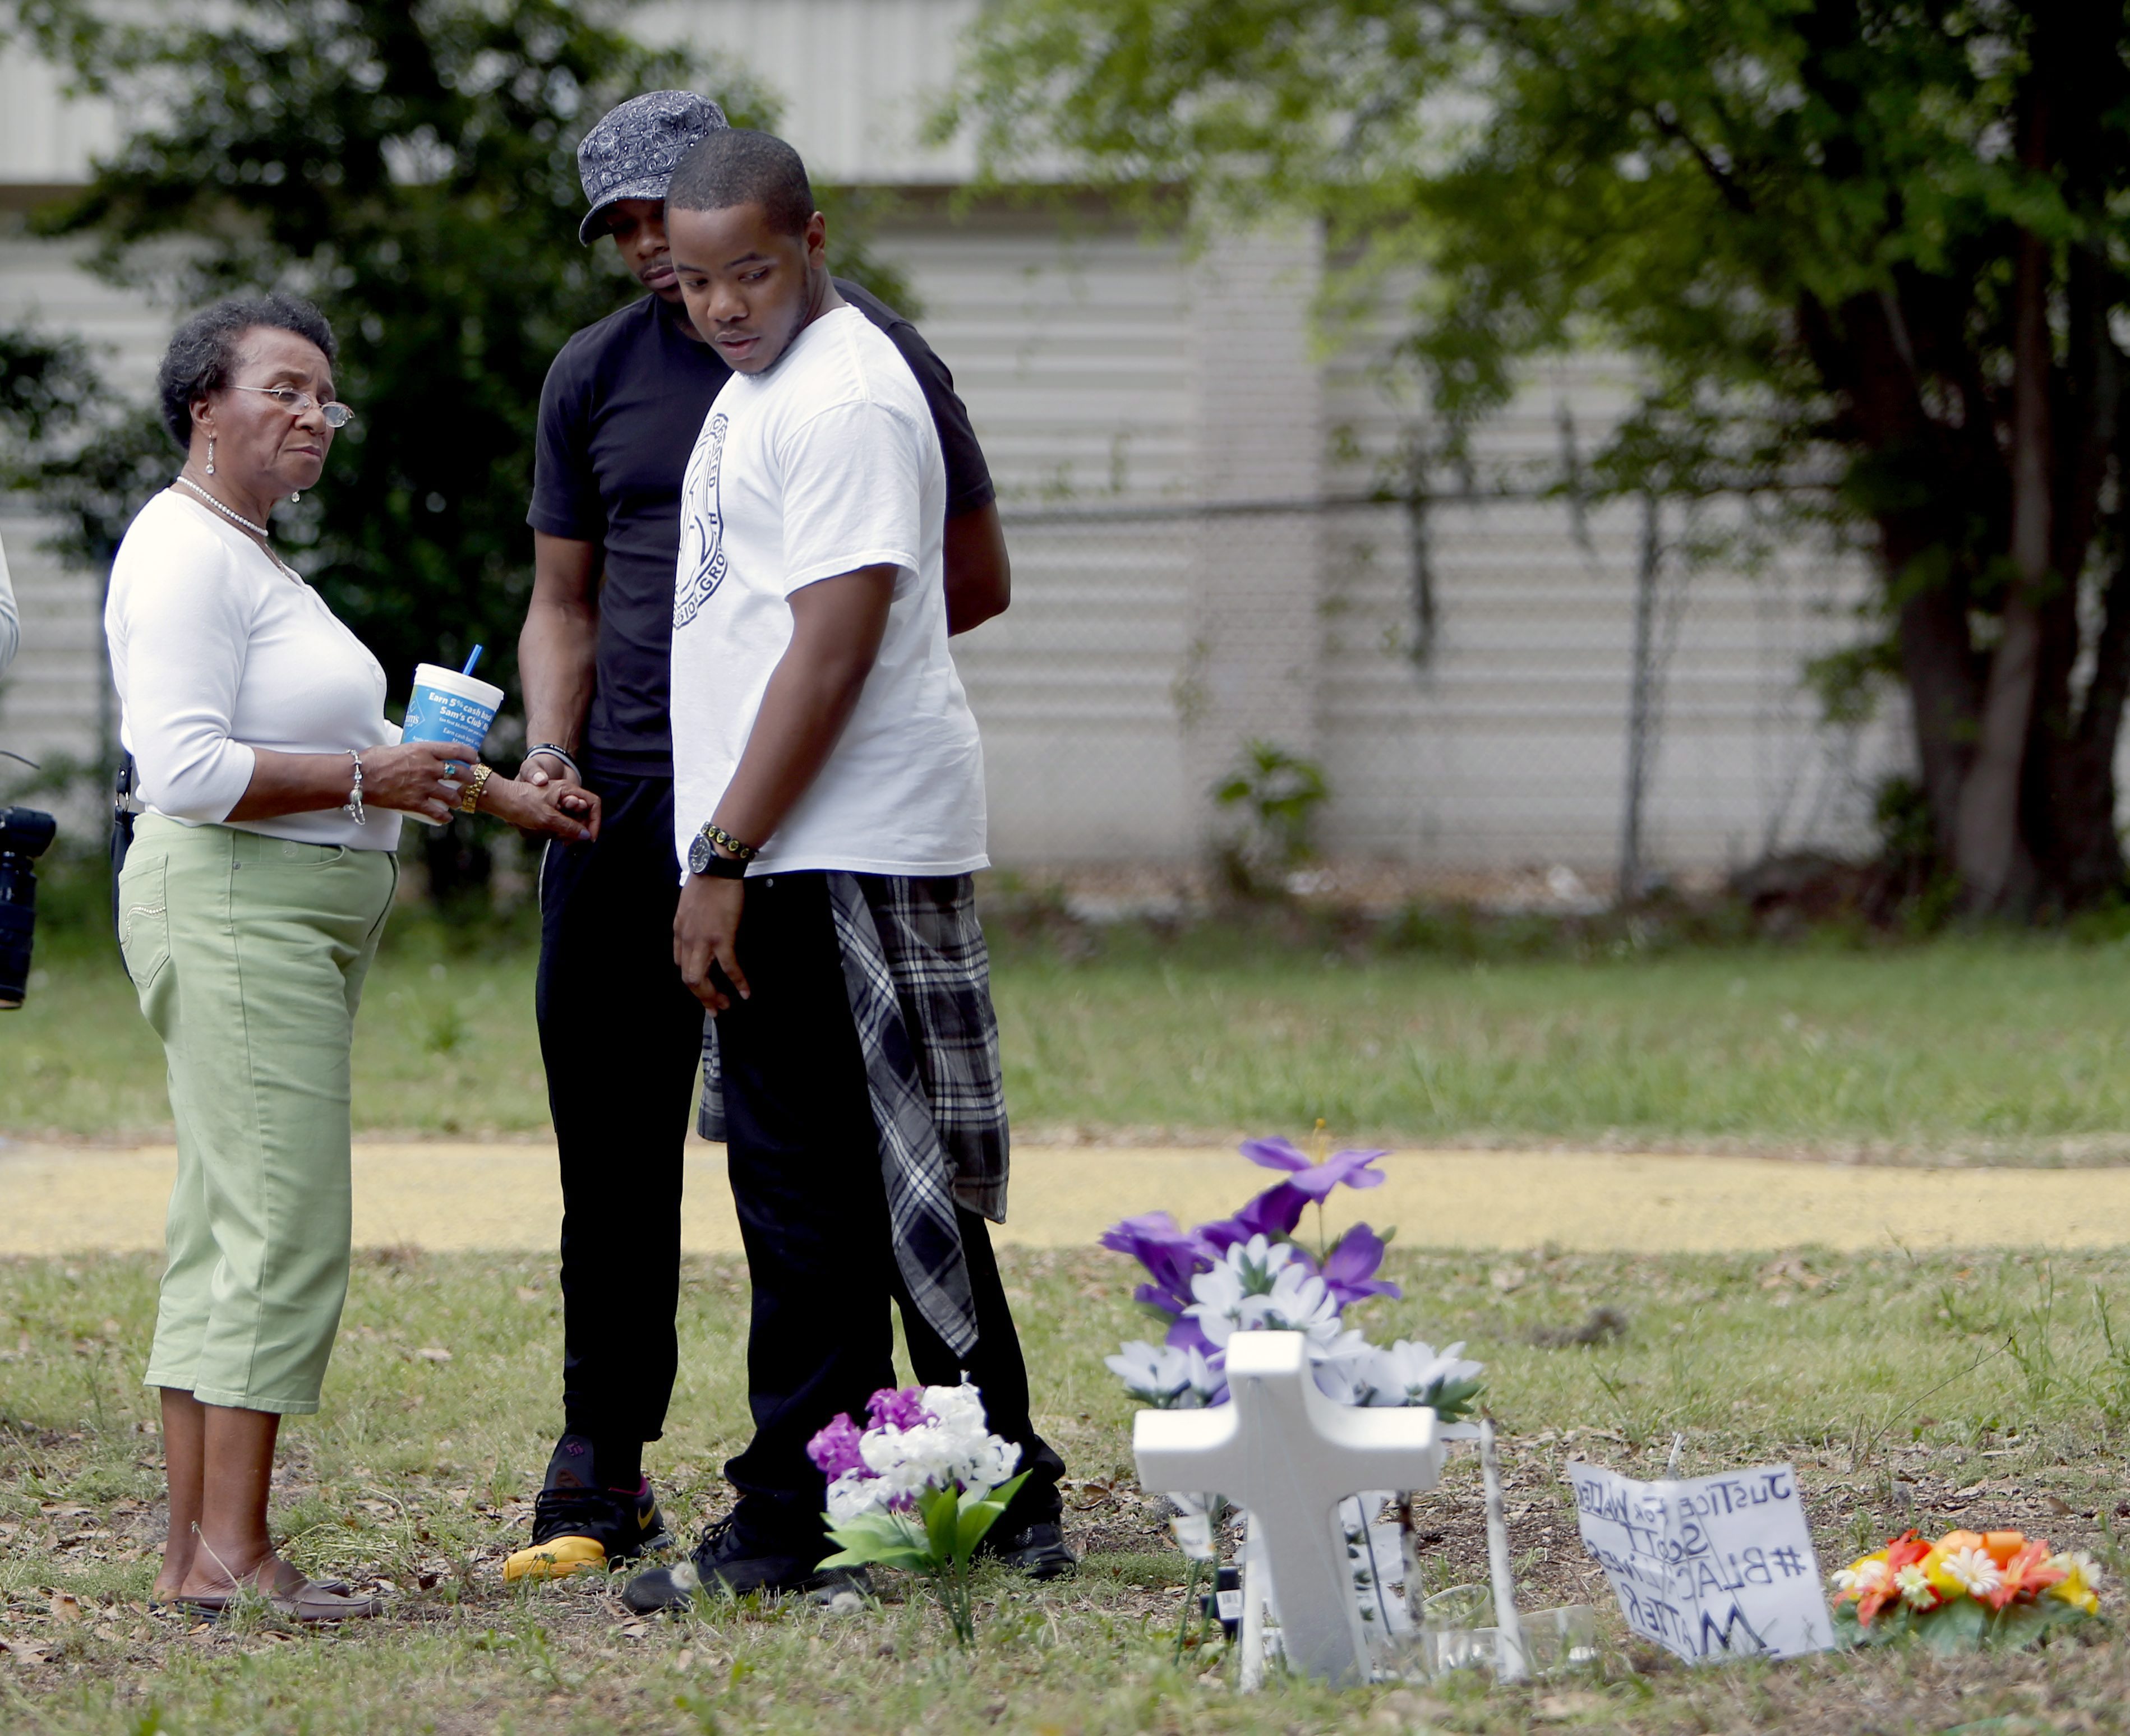 People gather at a memorial on the site where Walter L. Scott, 50, was shot by a white police officer in North Charleston, S.C.  (Photo: STEPHEN B. MORTON/EPA/Newscom)